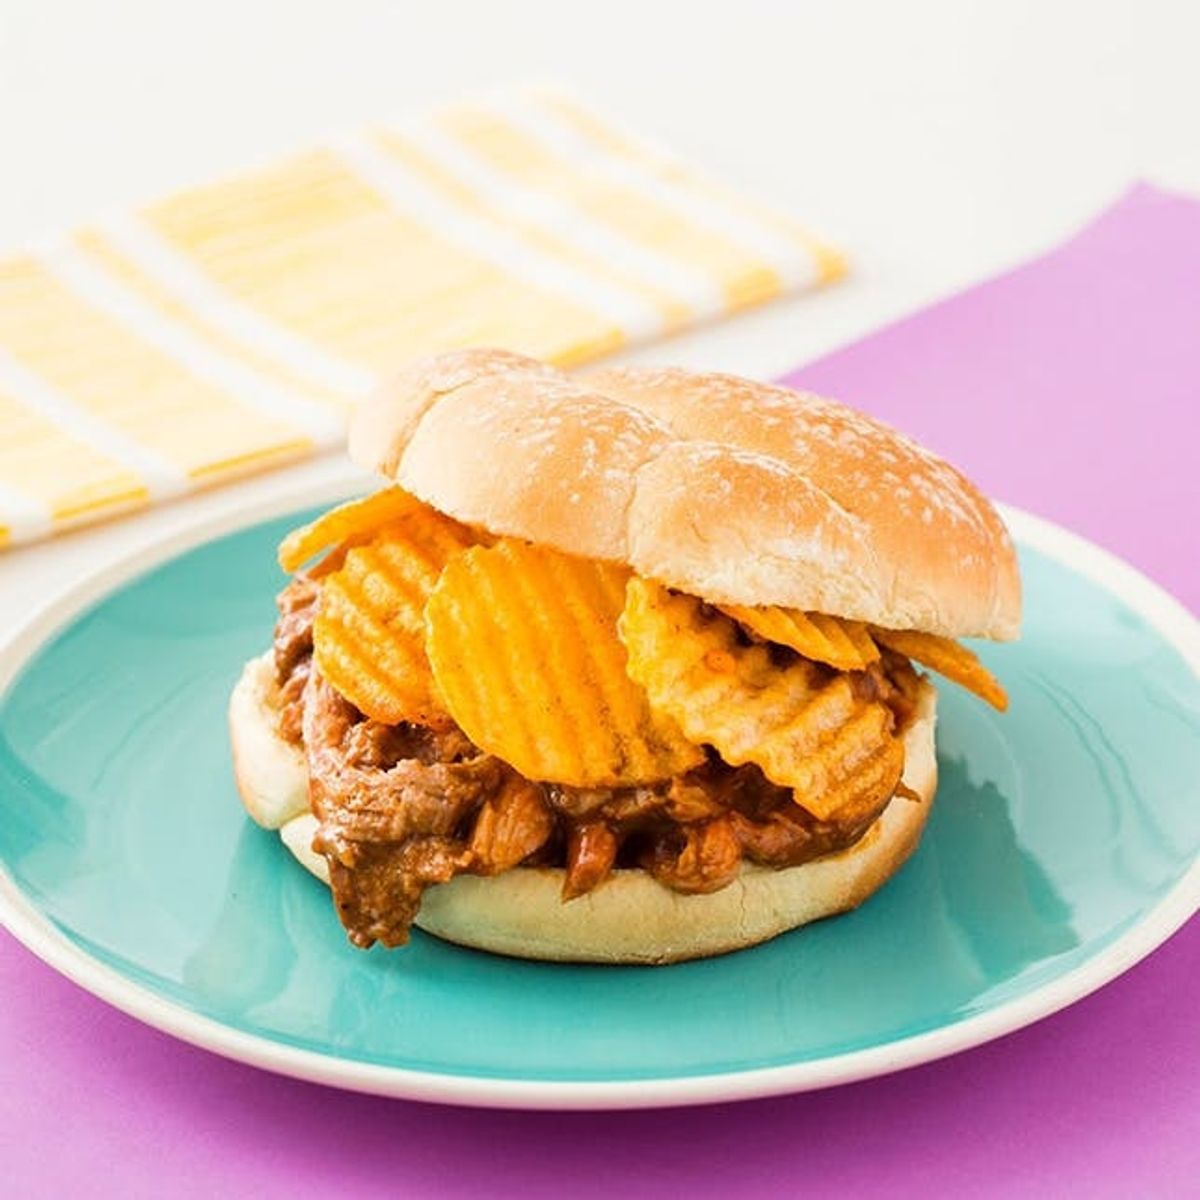 How to Make Pulled Pork Sandwiches